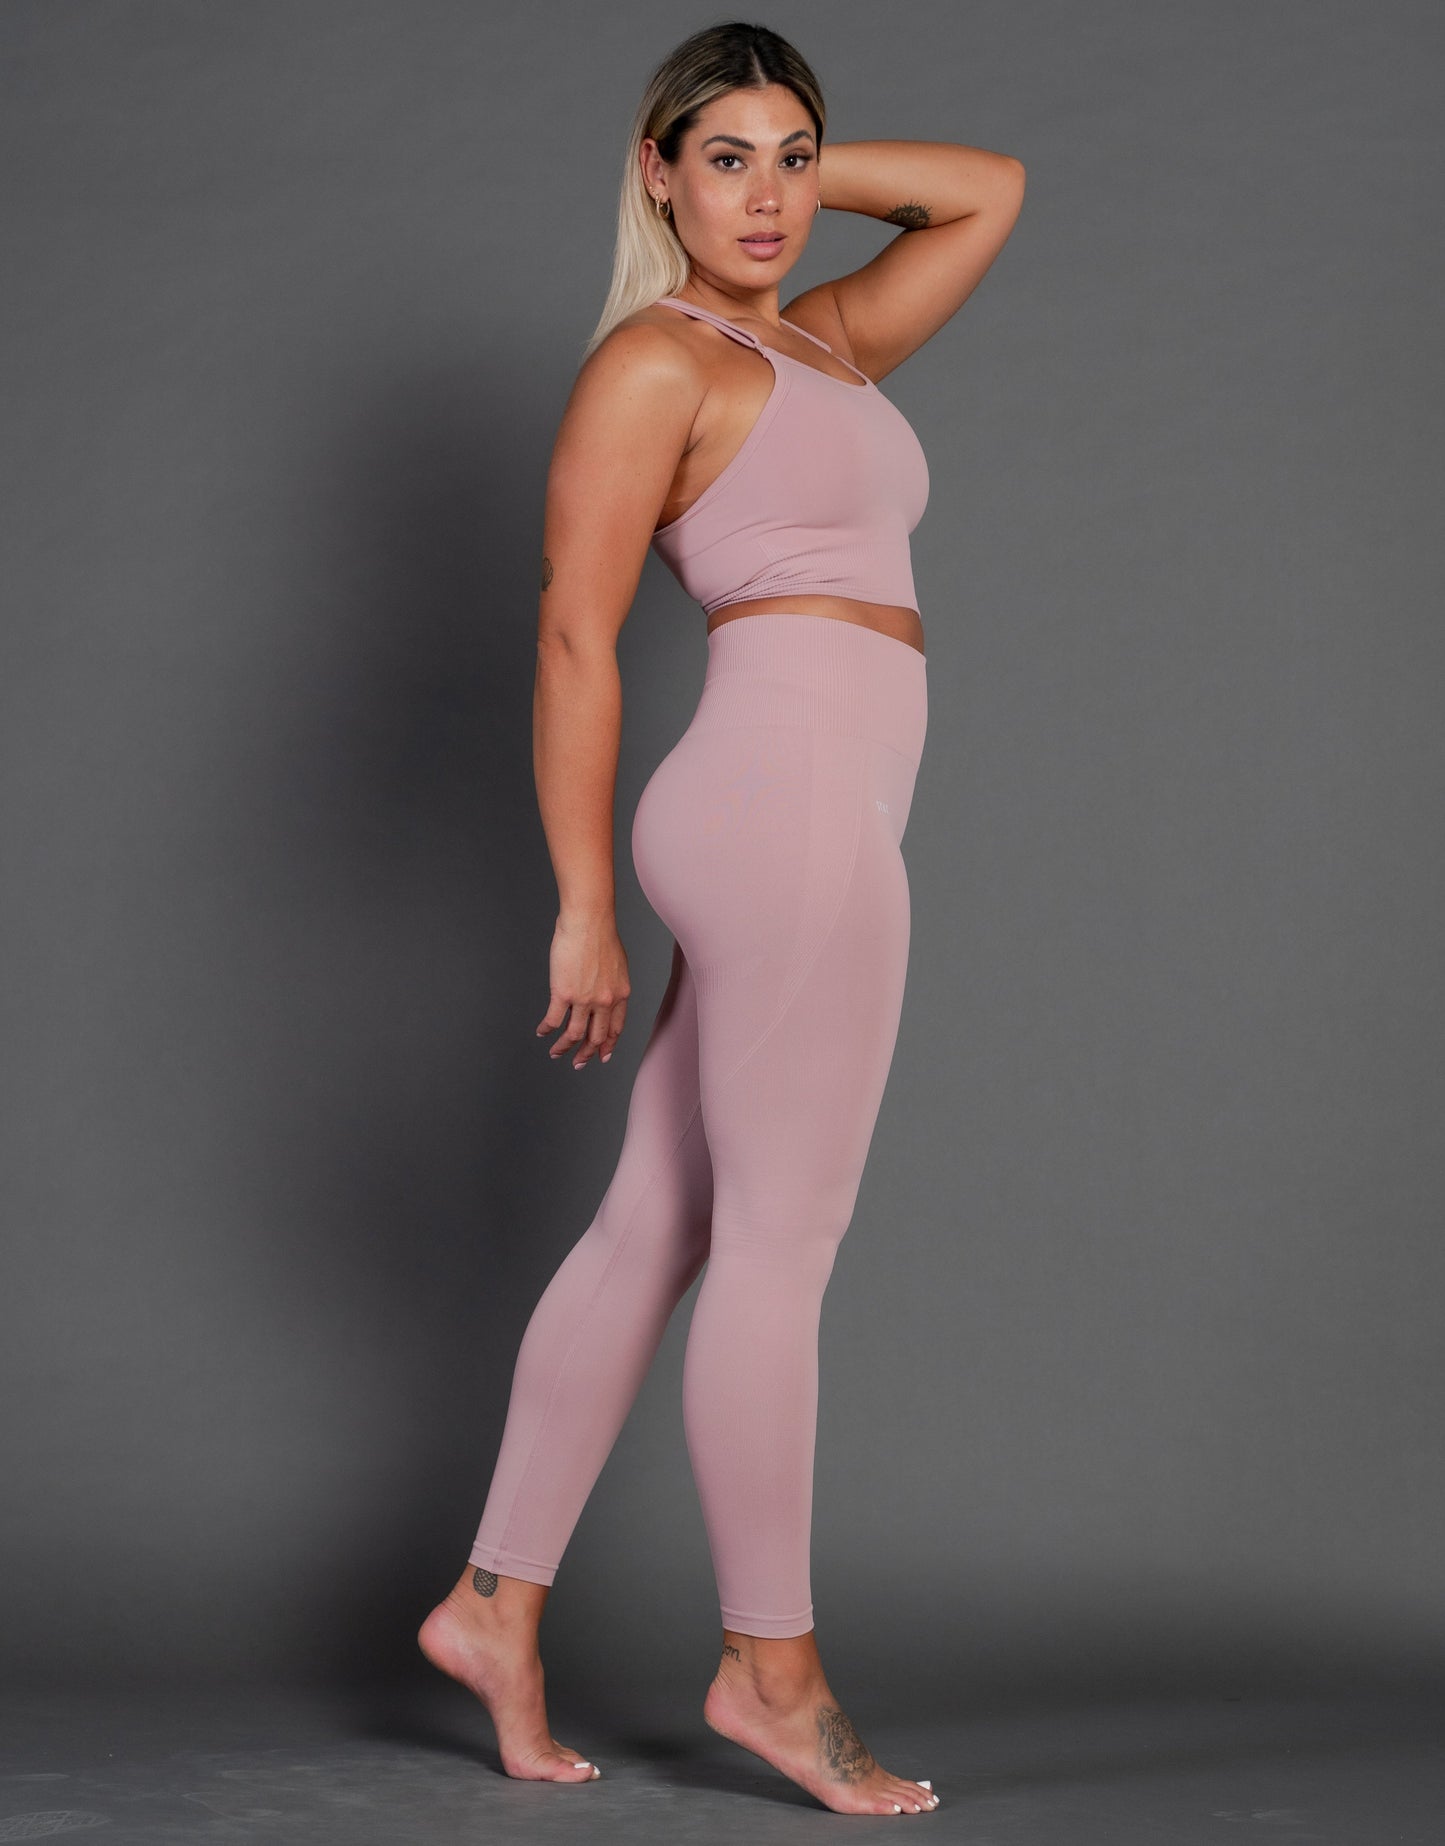 STAX. Premium Seamless V4 Tights - Dusty Rose